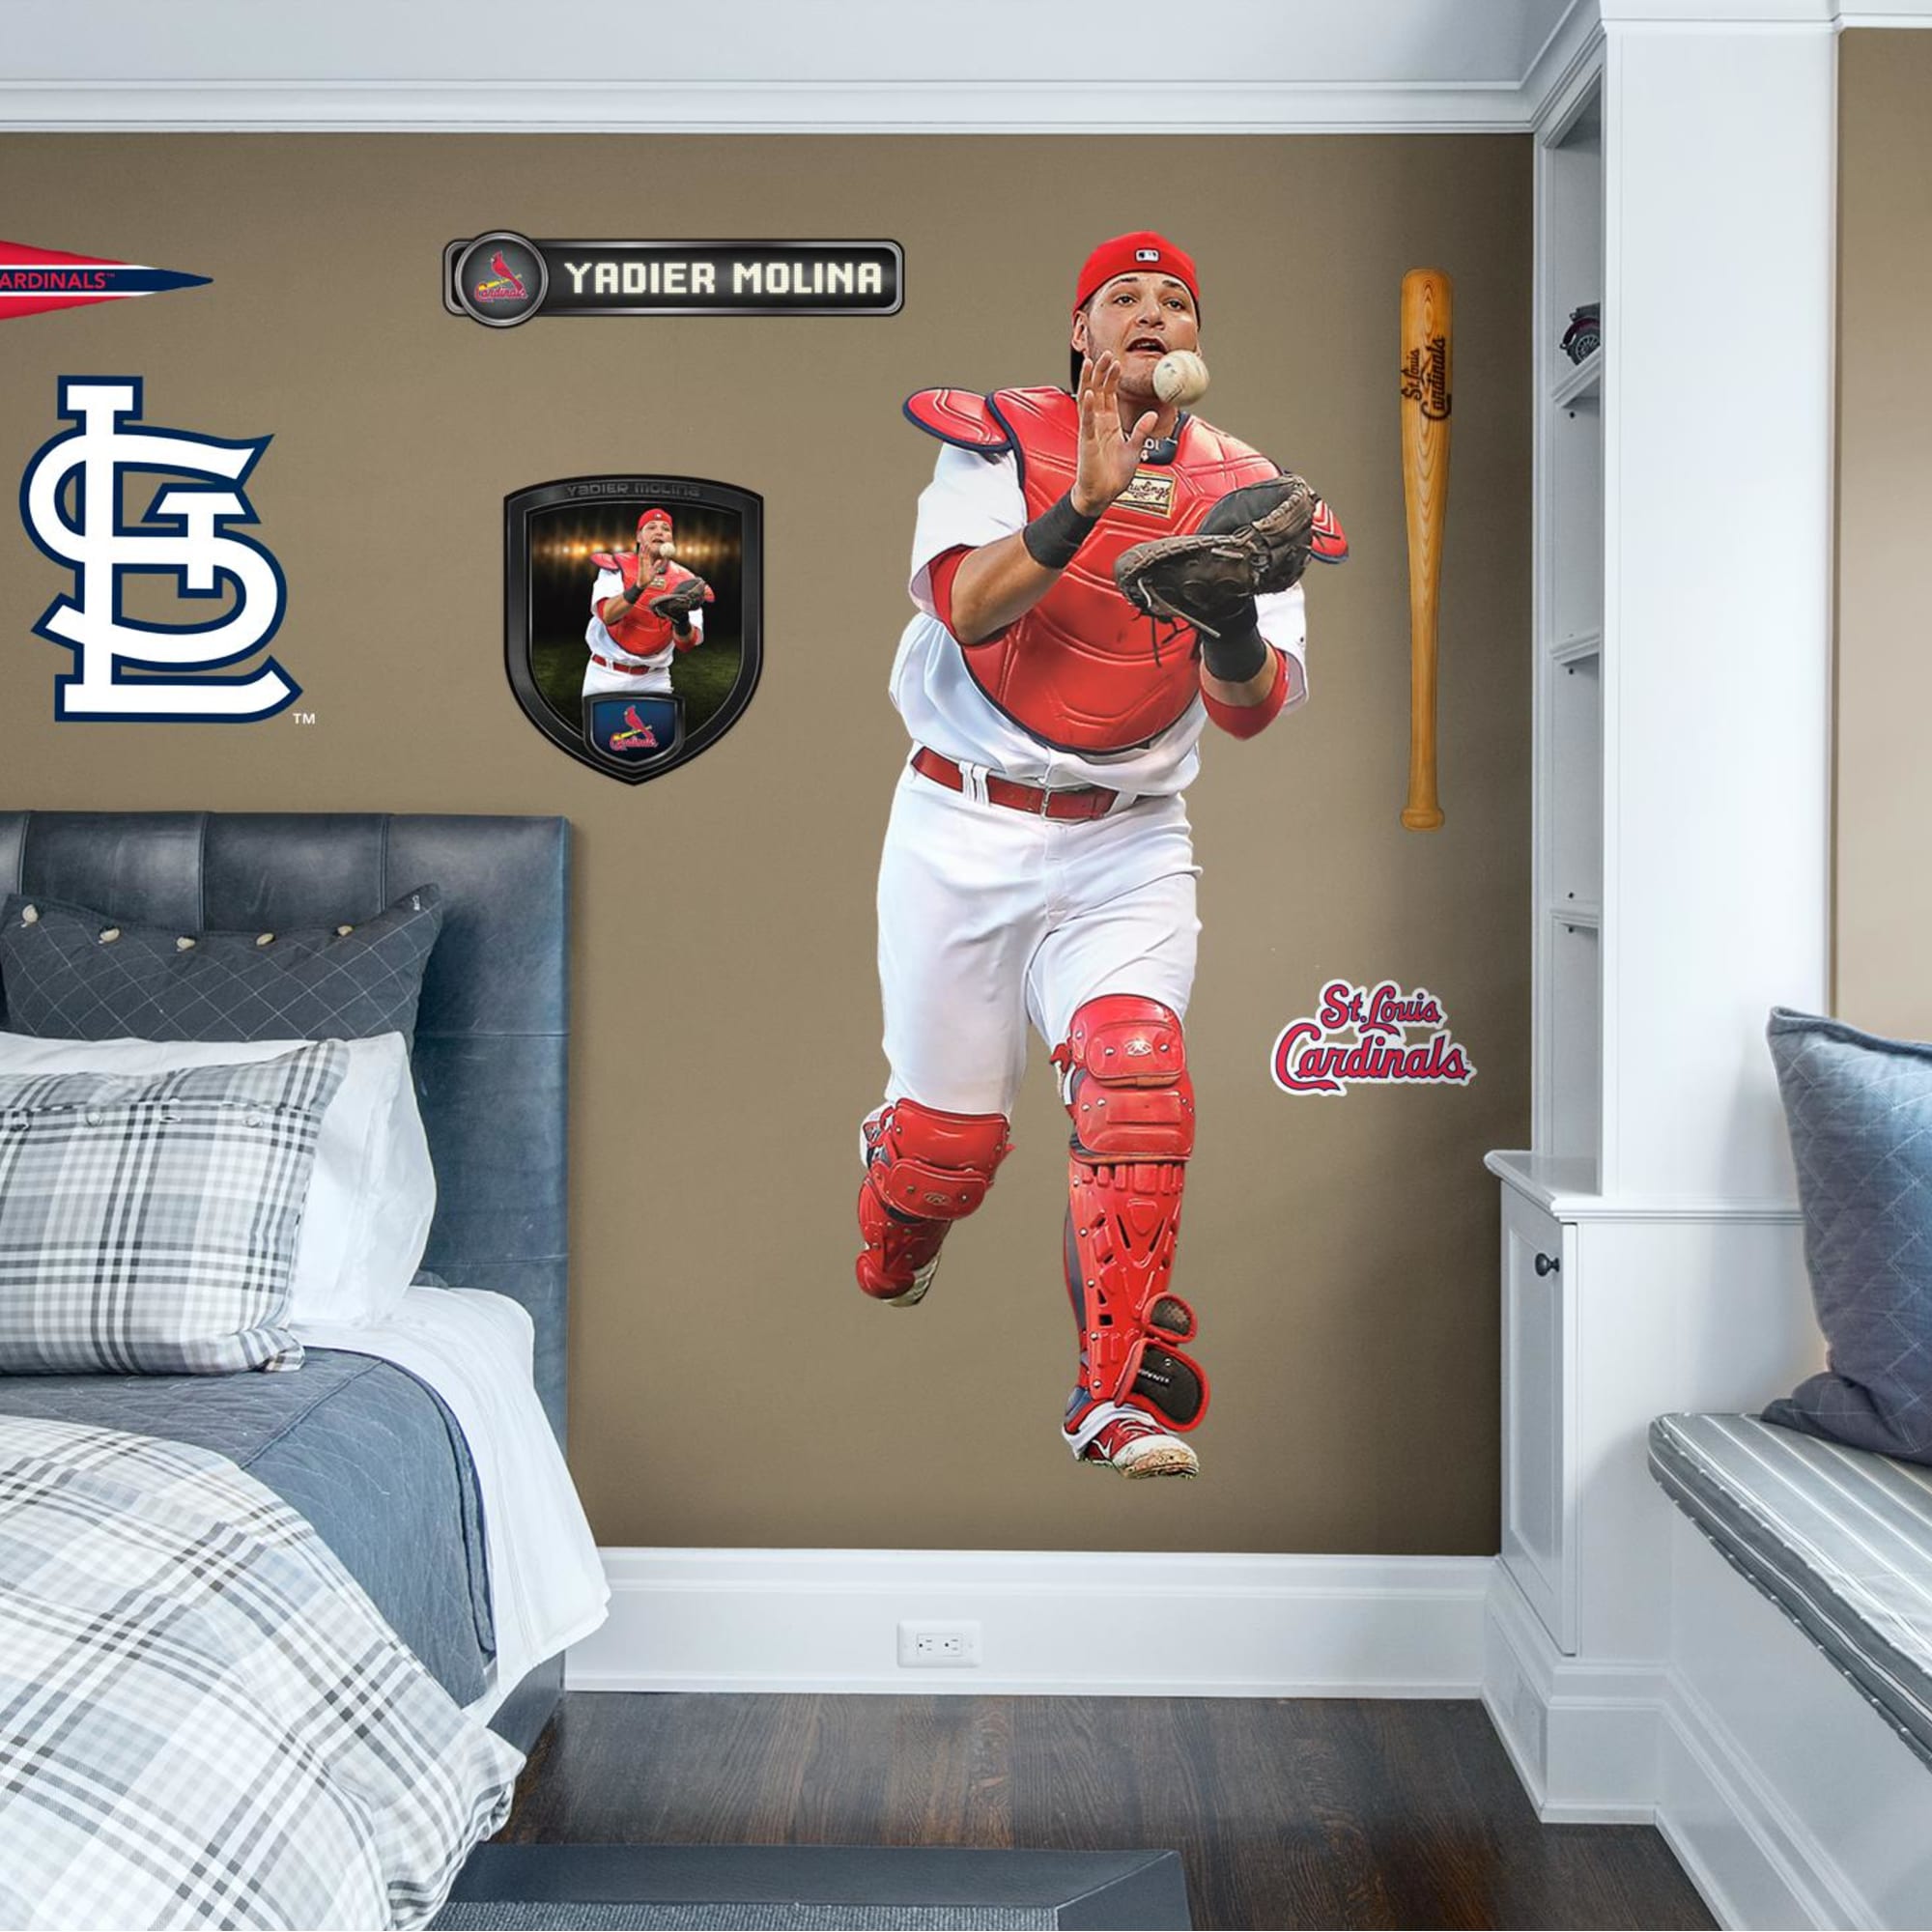 Yadier Molina for St. Louis Cardinals - Officially Licensed MLB Removable Wall Decal Life-Size Athlete + 9 Decals (28"W x 72"H)